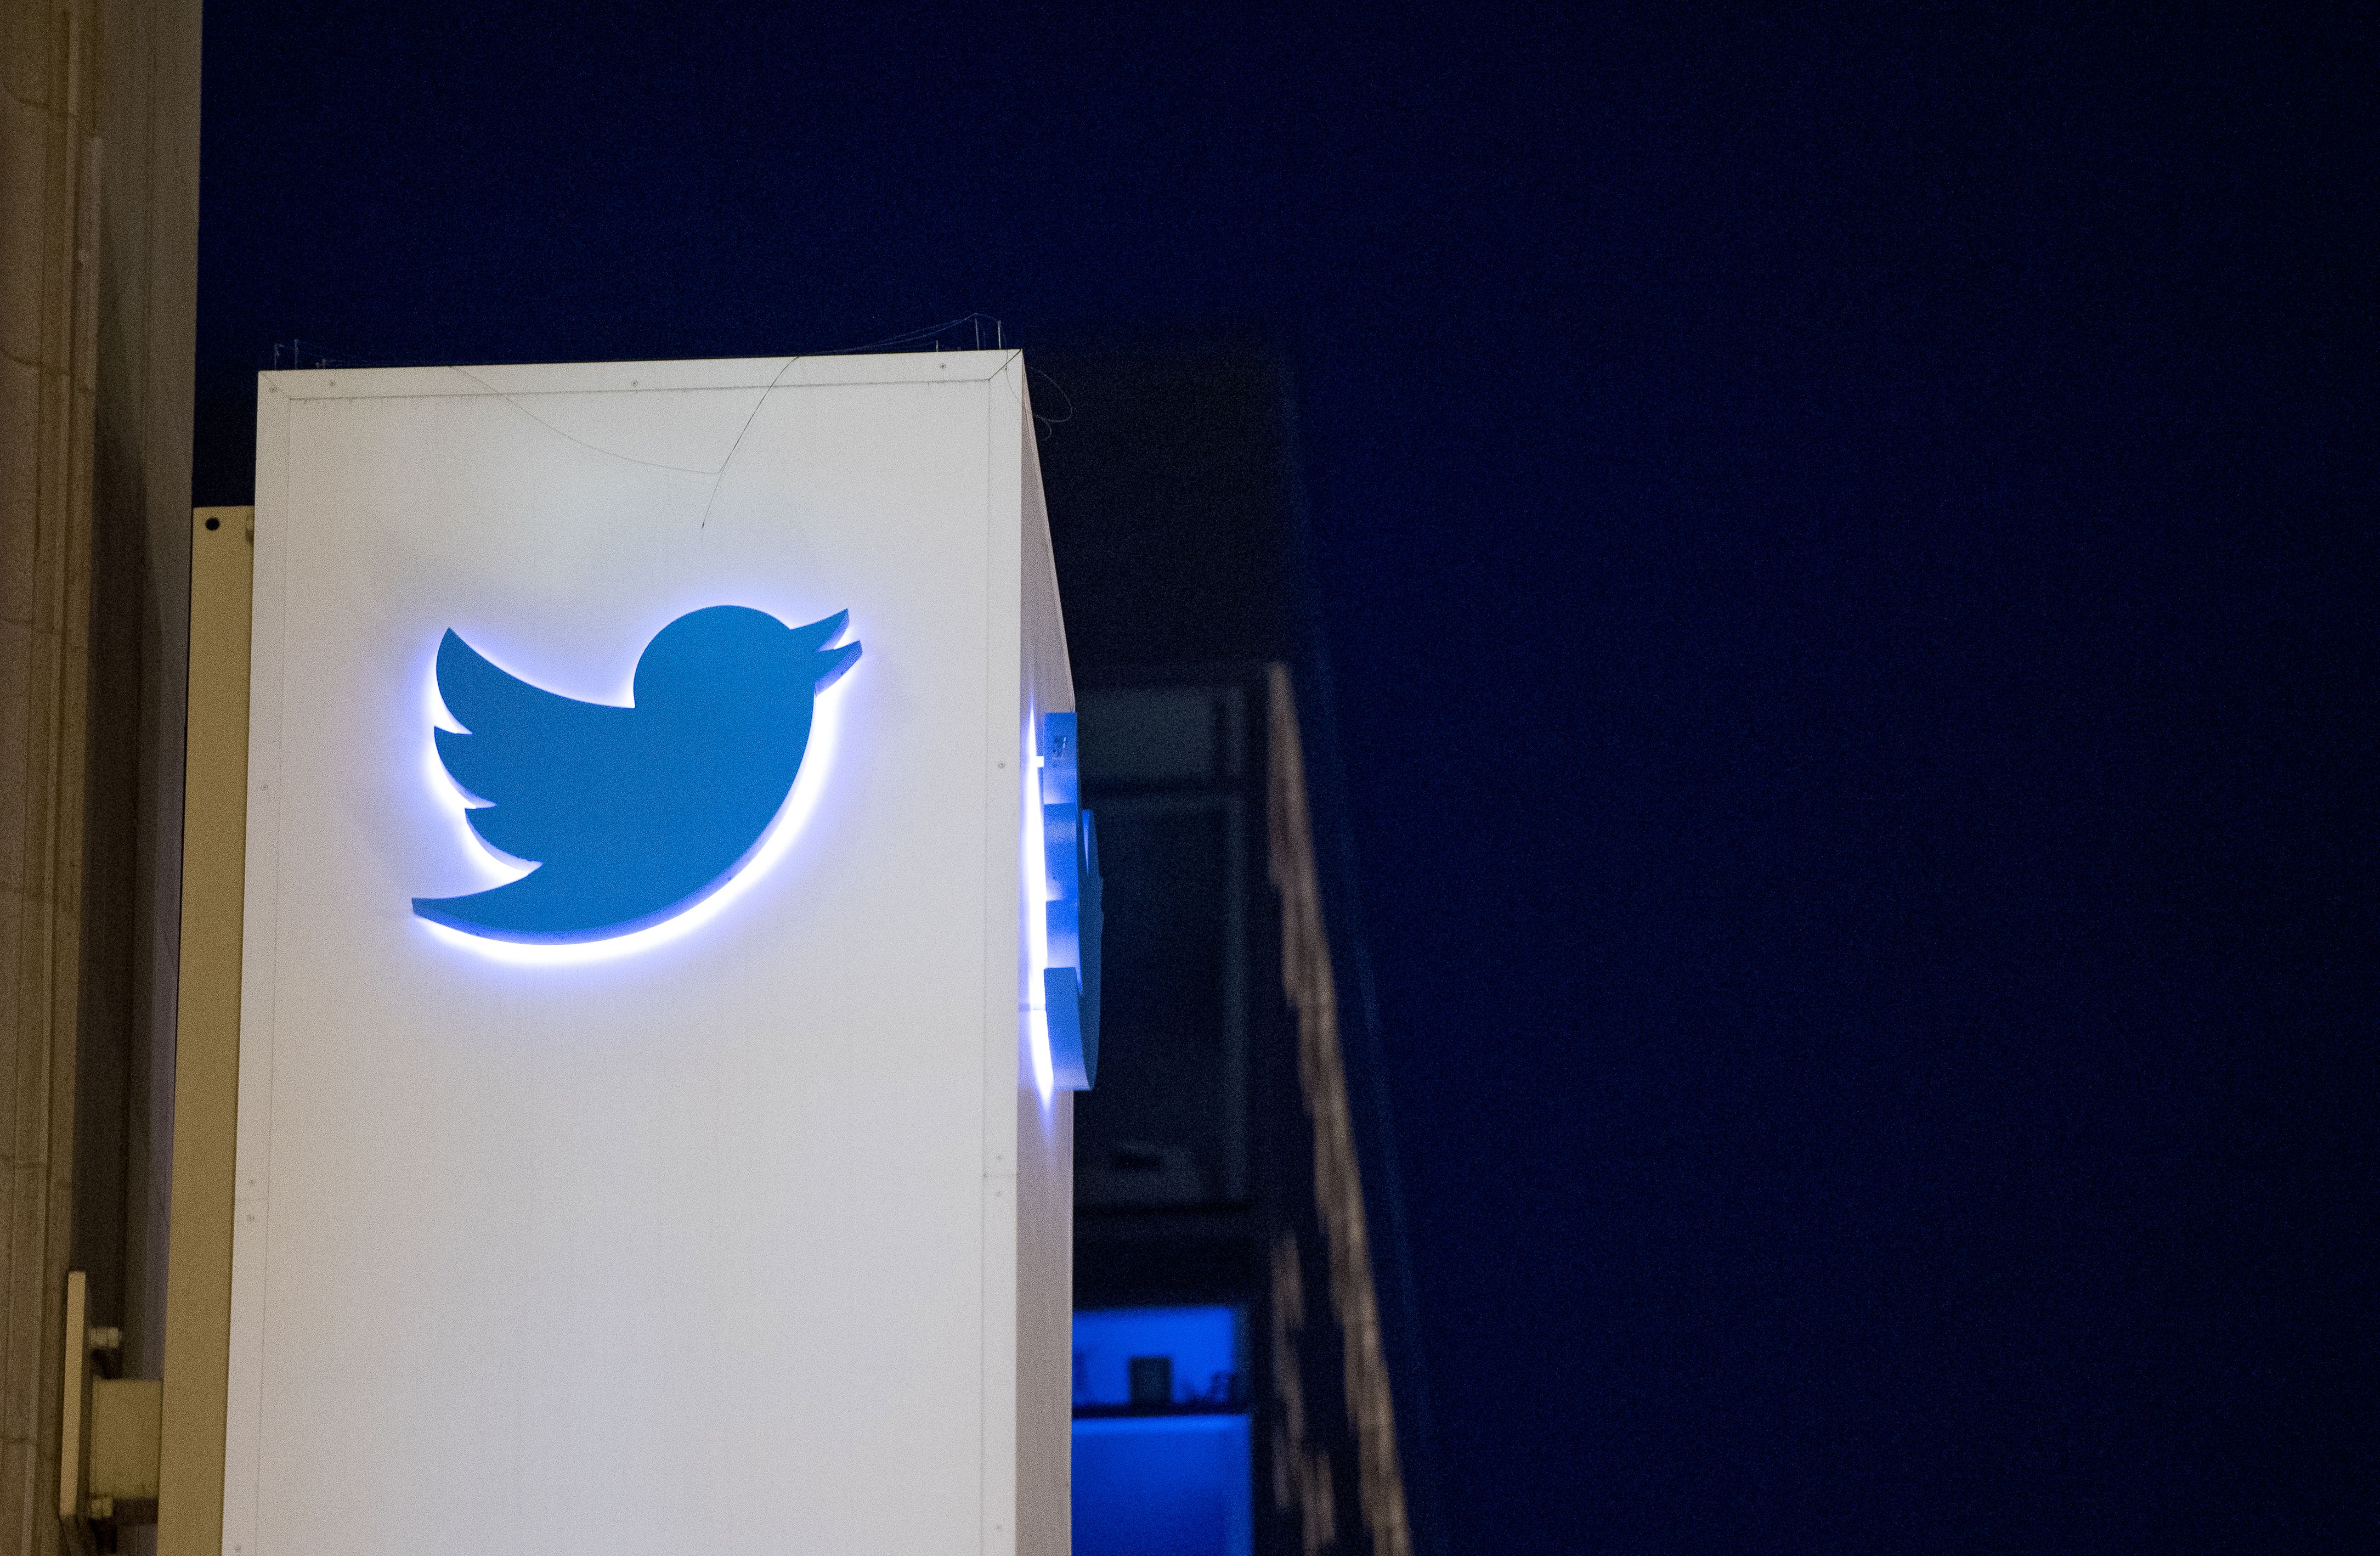 This Nov. 4, 2016 photo shows Twitter's logo at its San Francisco headquarters. (Josh Edelson—AFP/Getty Images)